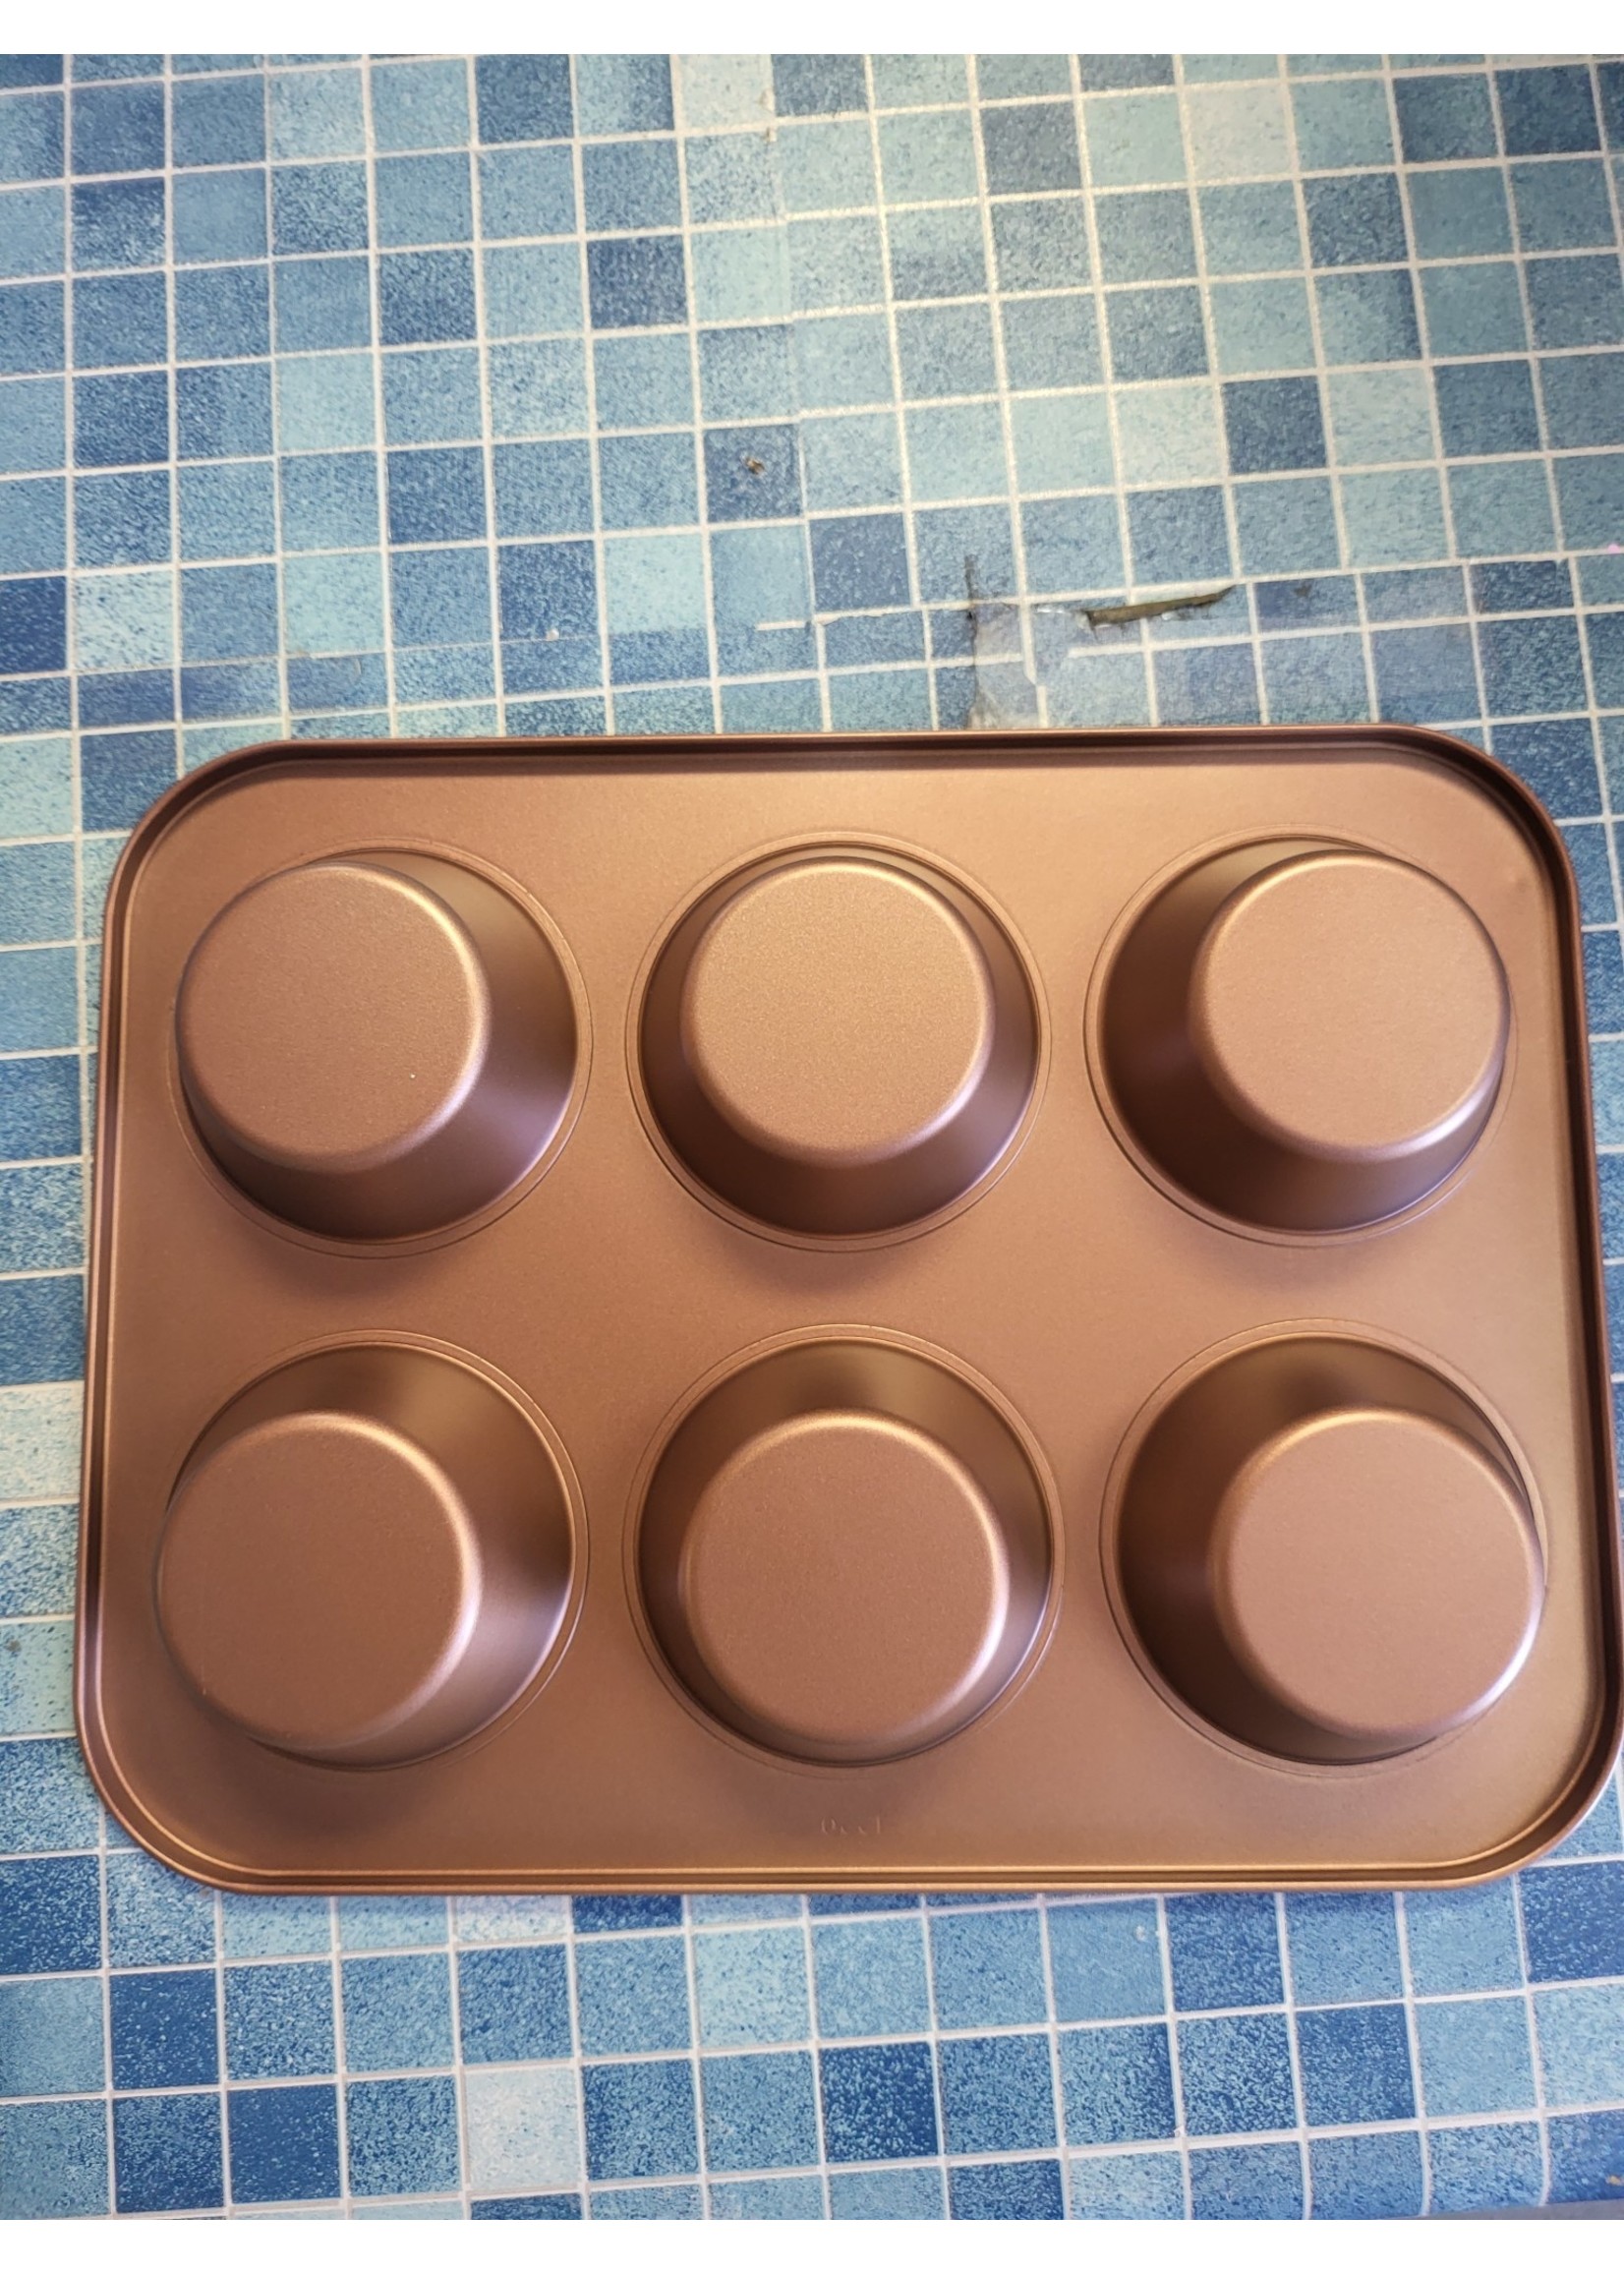 Cuisinart Chef's Classic 6 Cup Non-Stick Bronze Muffin Top Pan - AMB-6MTPBZ